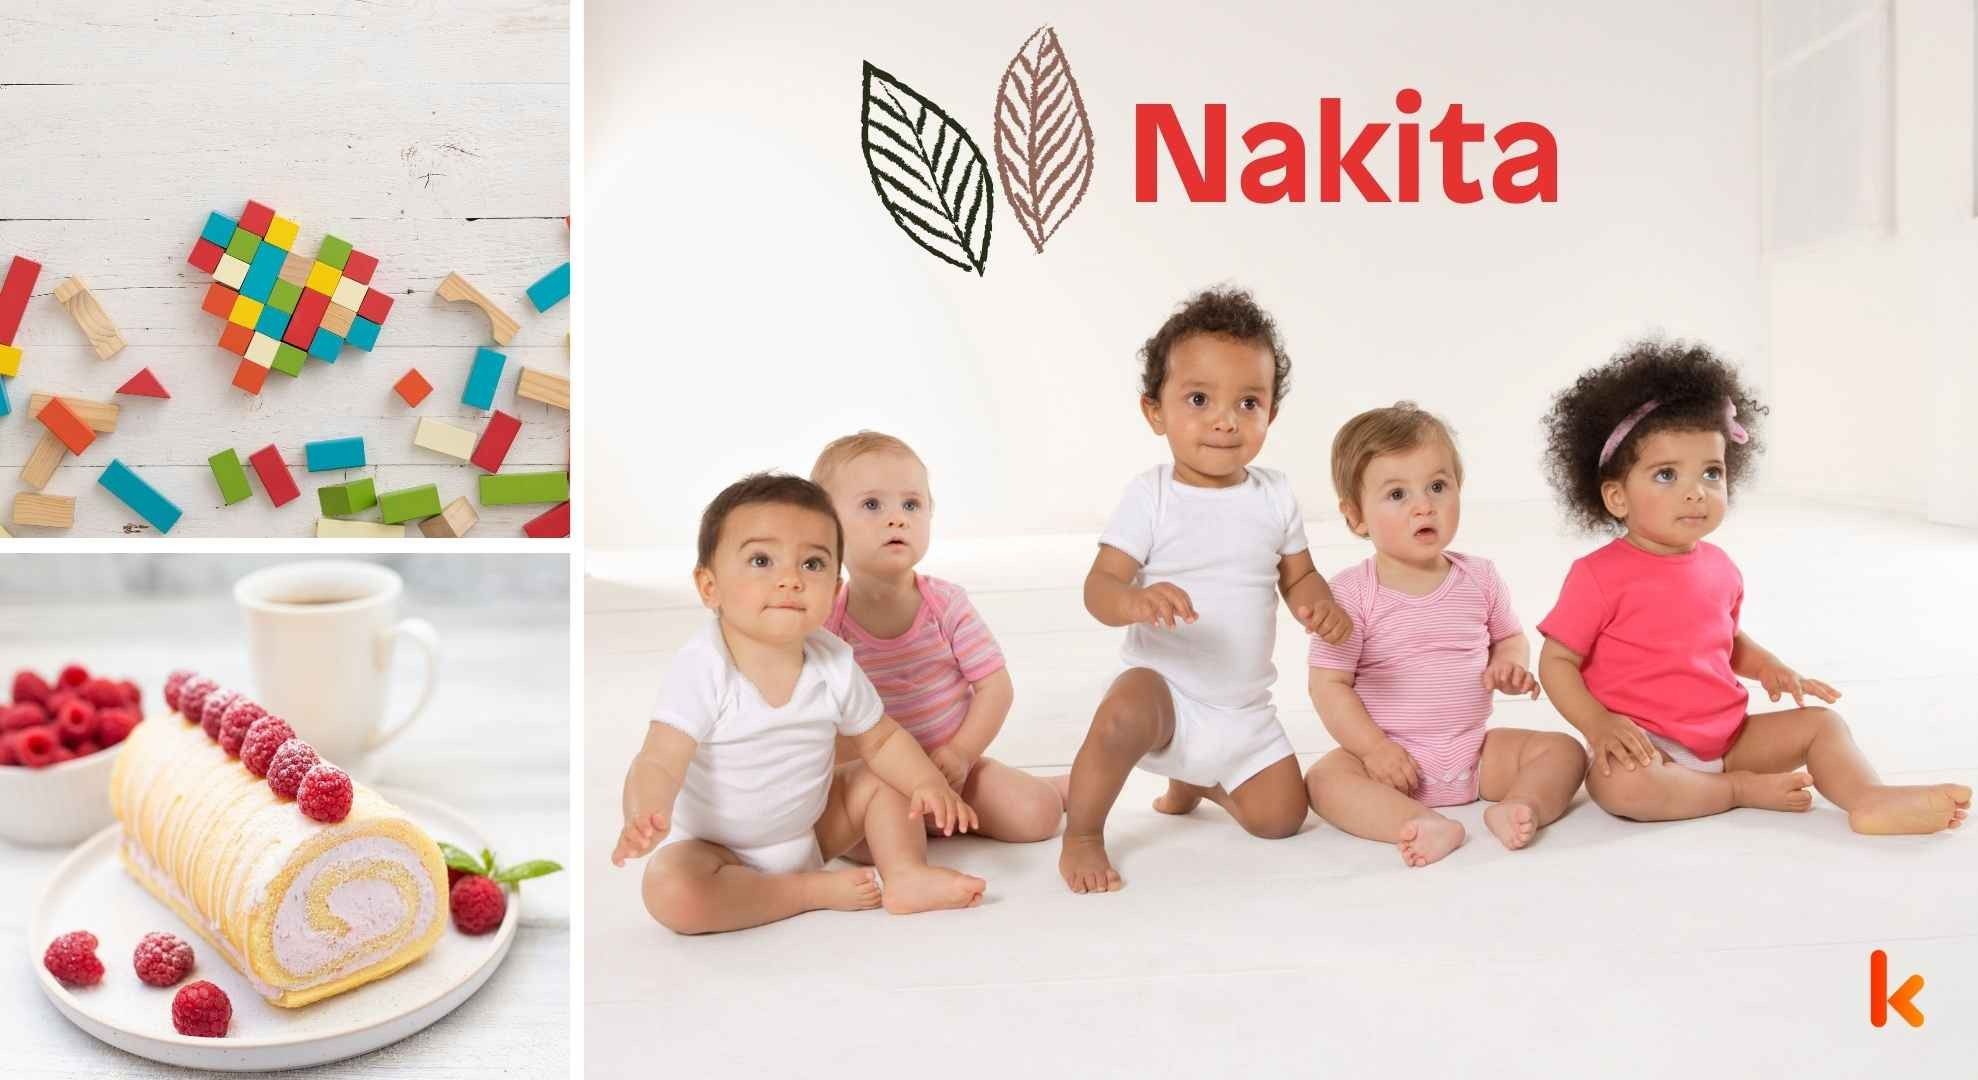 Meaning of the name Nakita